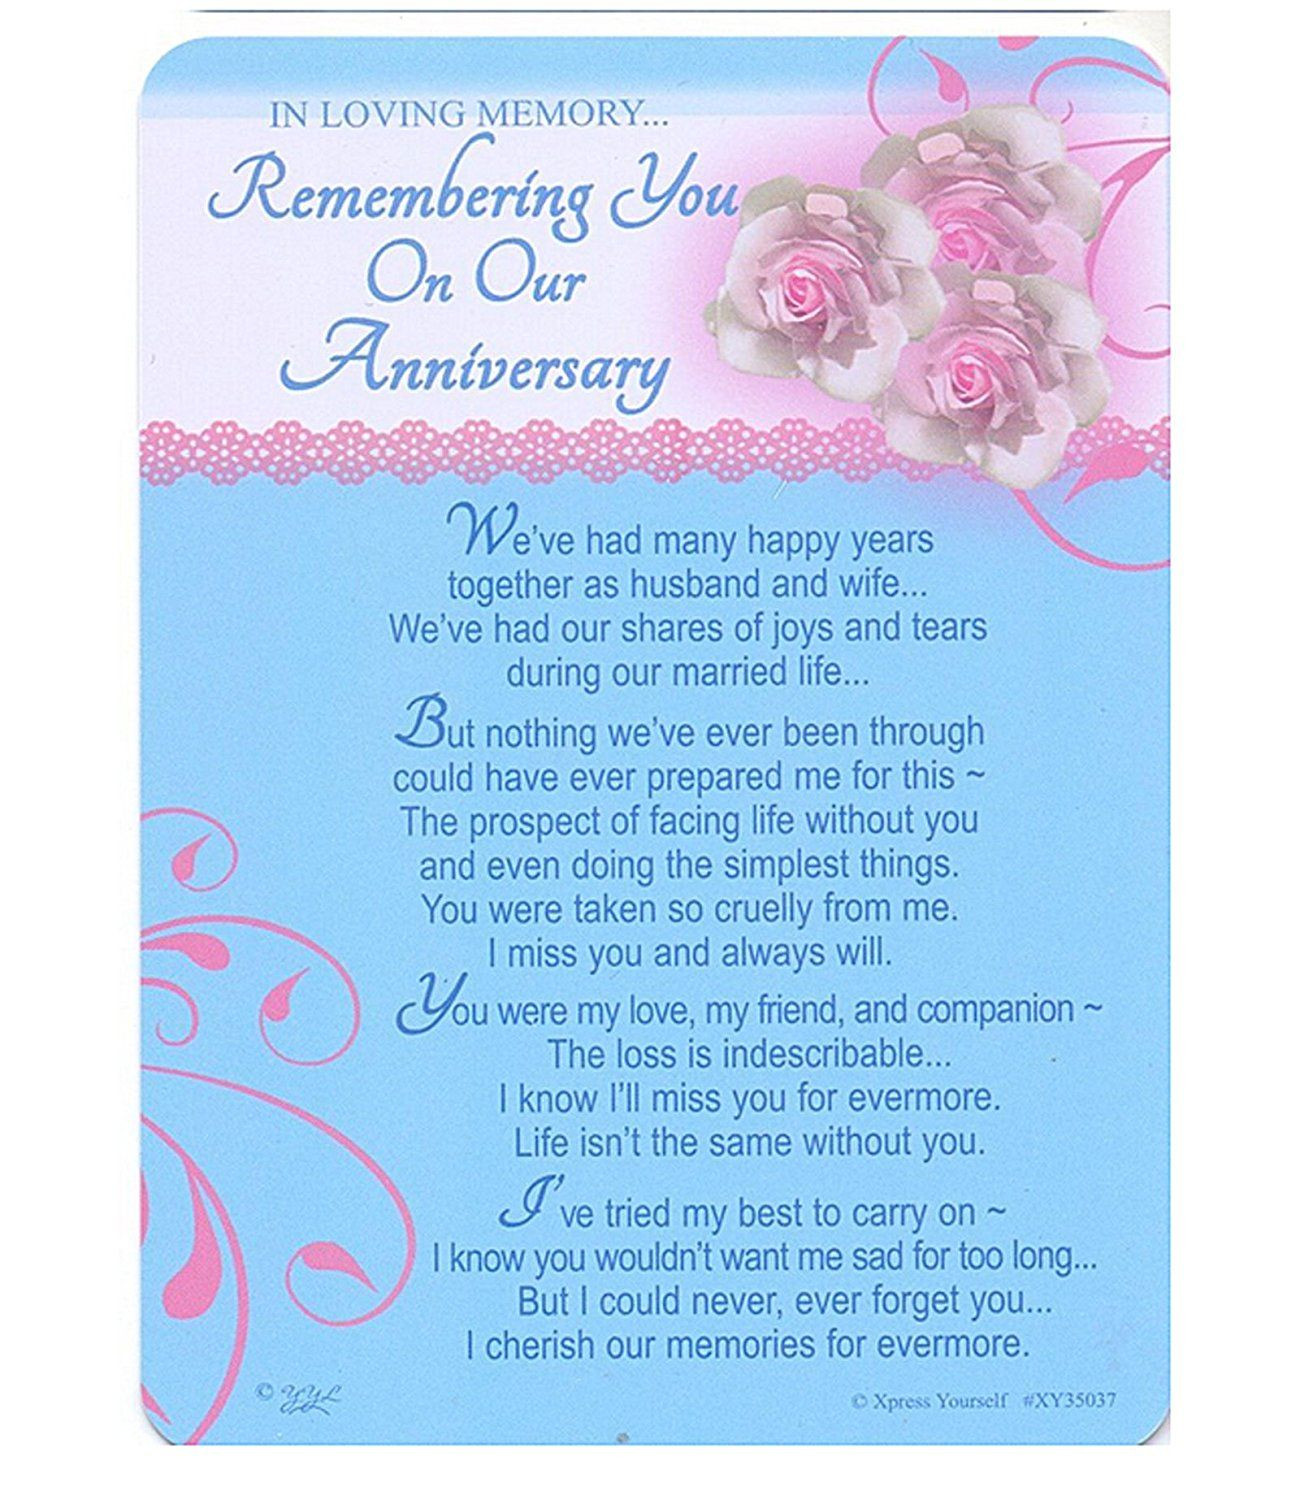 Wedding Anniversary After Death Of Spouse Quotes
 Pin by Jsymonds on True